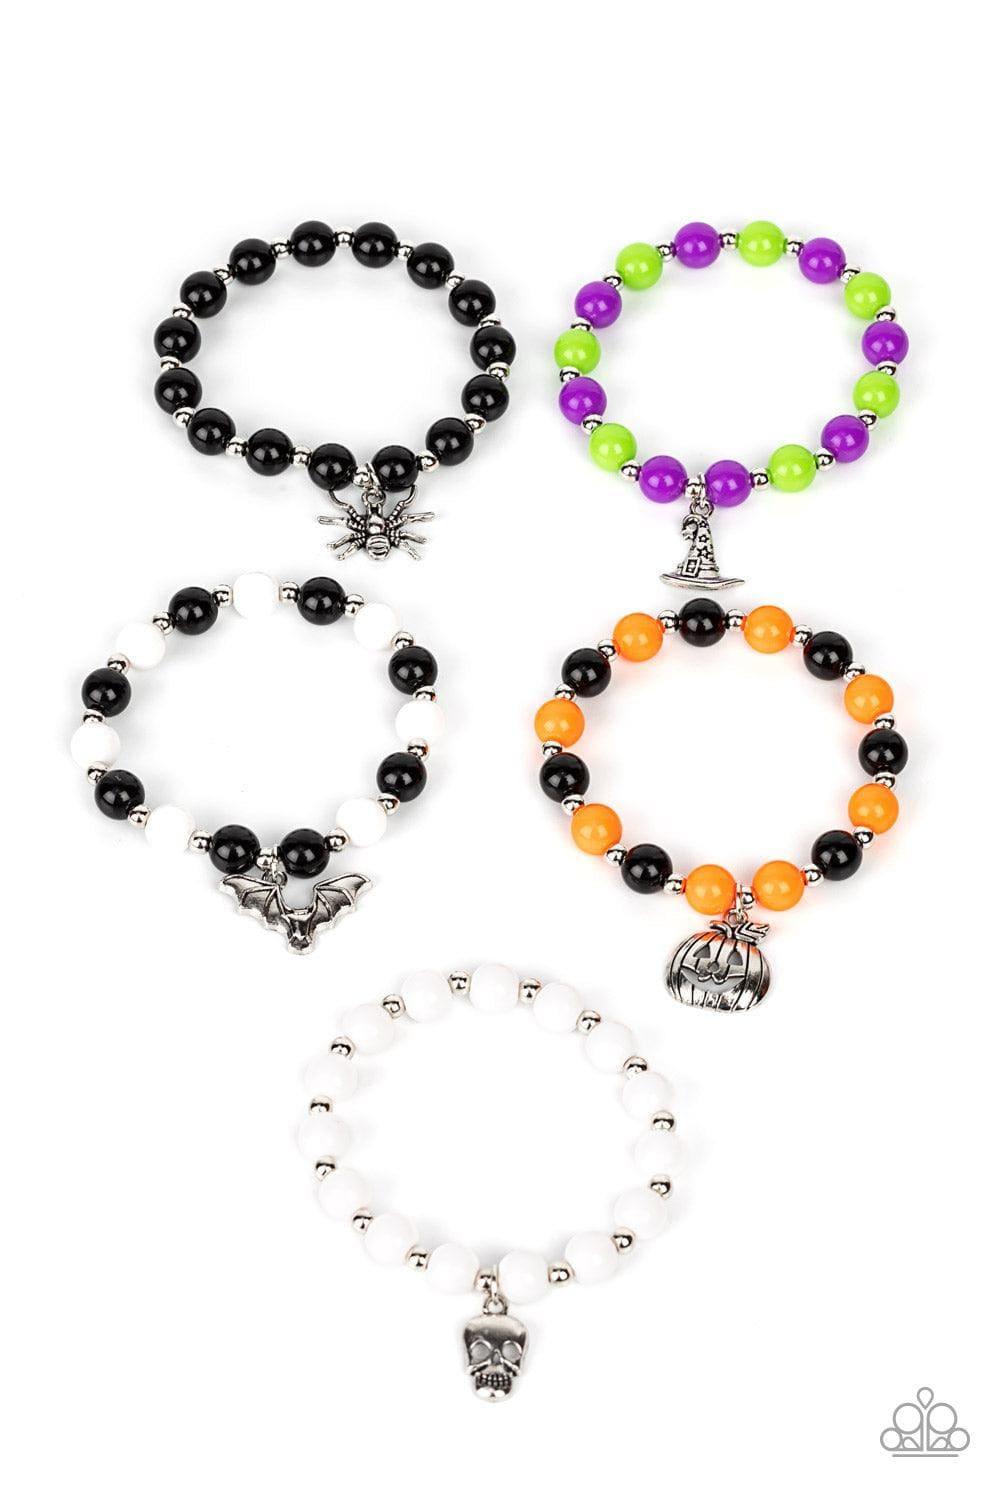 Paparazzi Accessories - Paparazzi Starlet Shimmer Jewelry - Ghoulish Charms Bracelets - Bling by JessieK